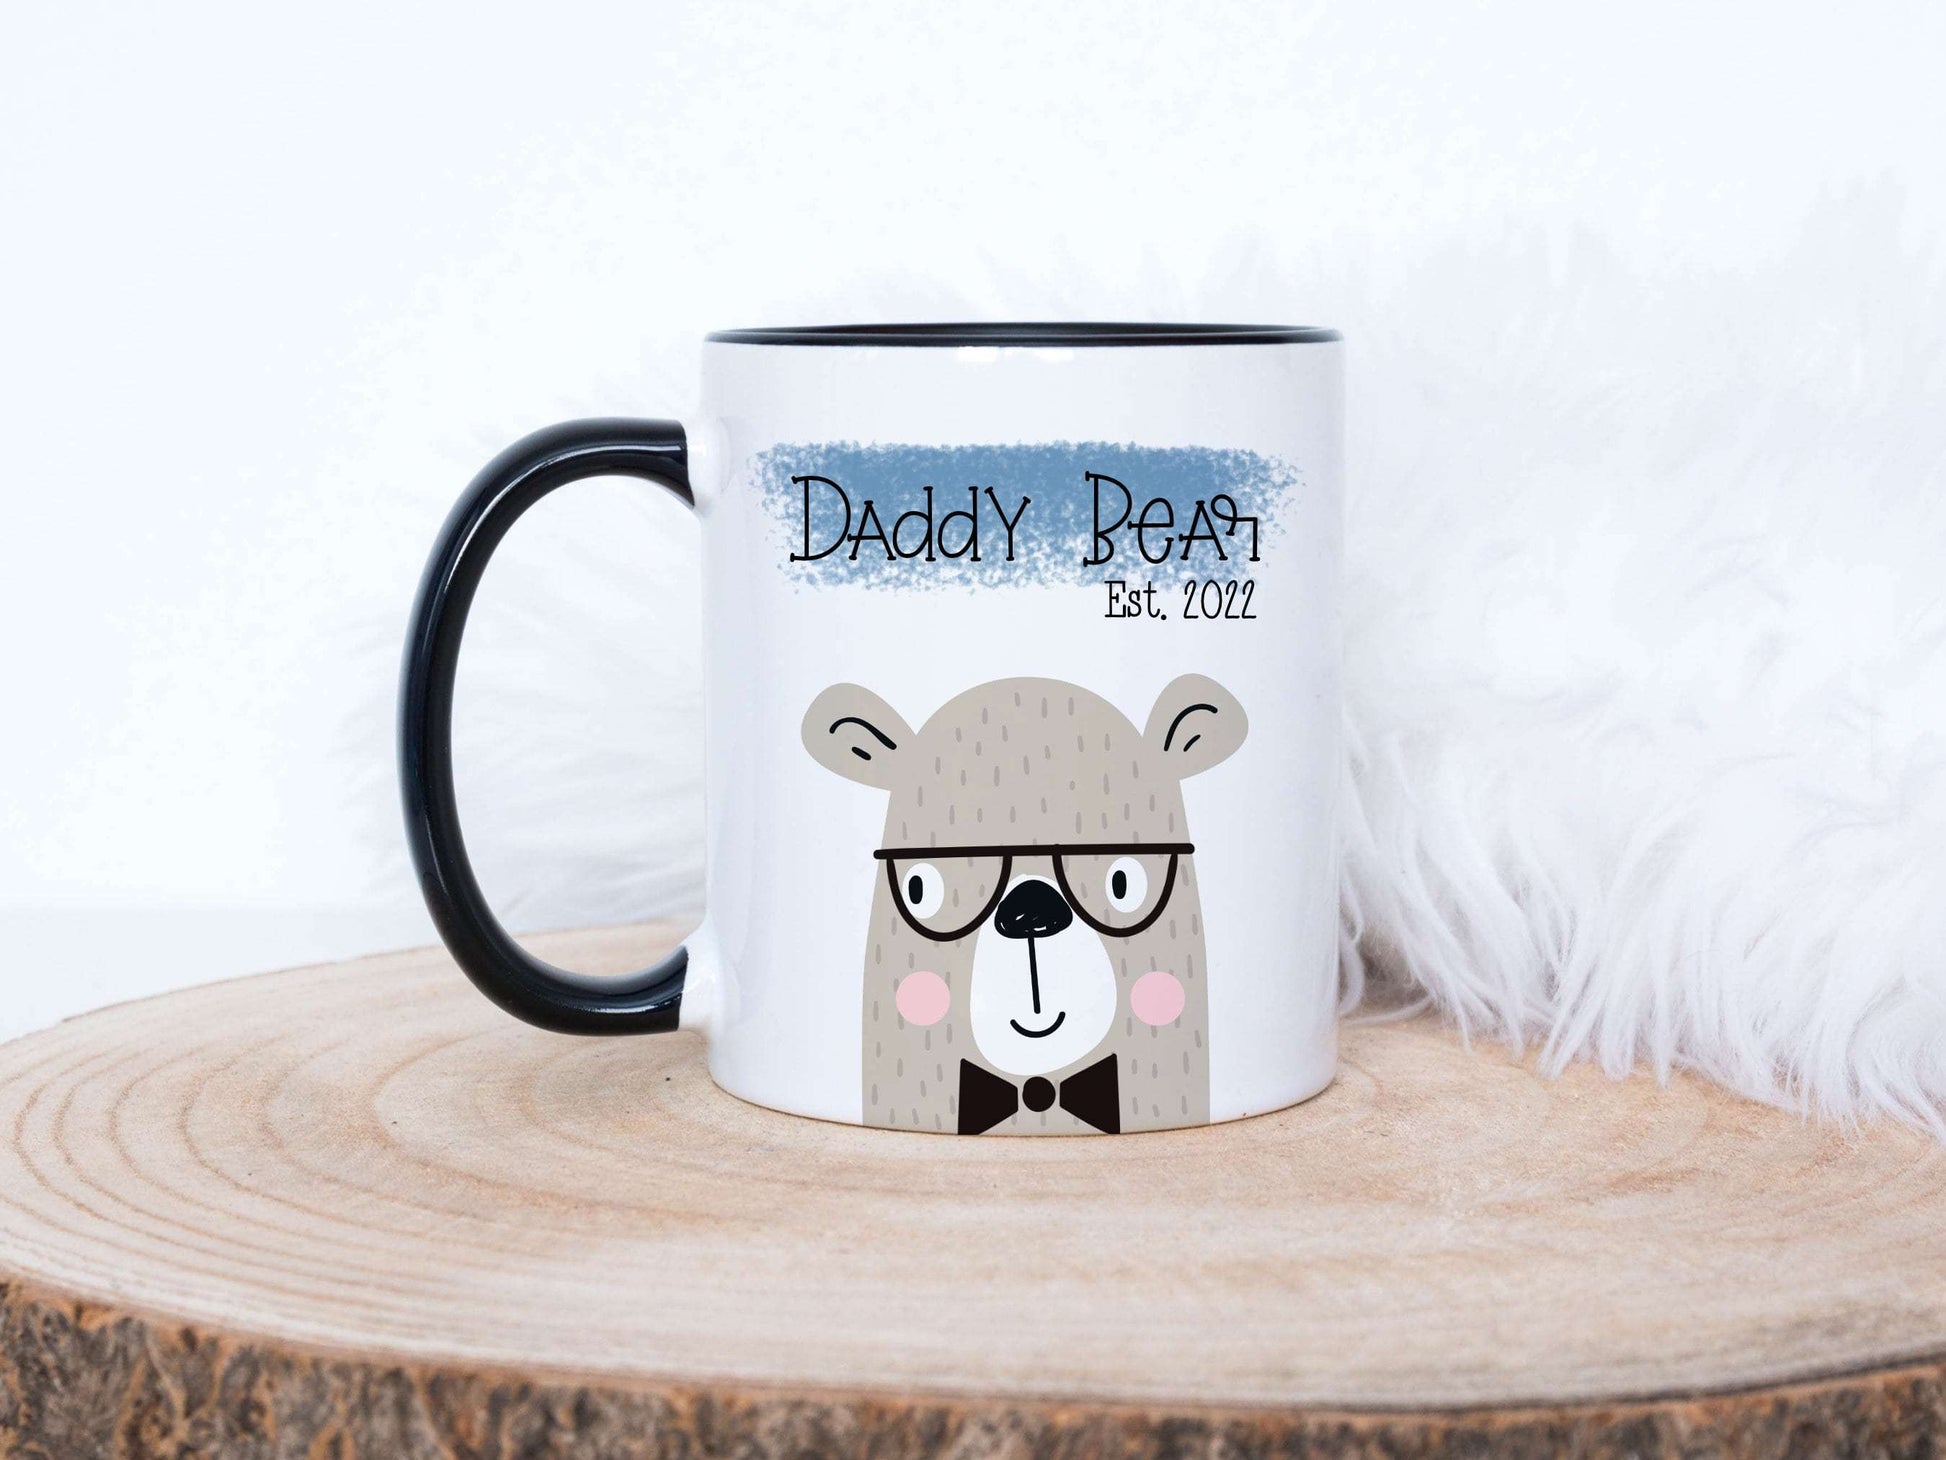 white mug with a cute bear design printed on with the text daddy bear above, The mug is sitting on a wood slice with fluffy background behind